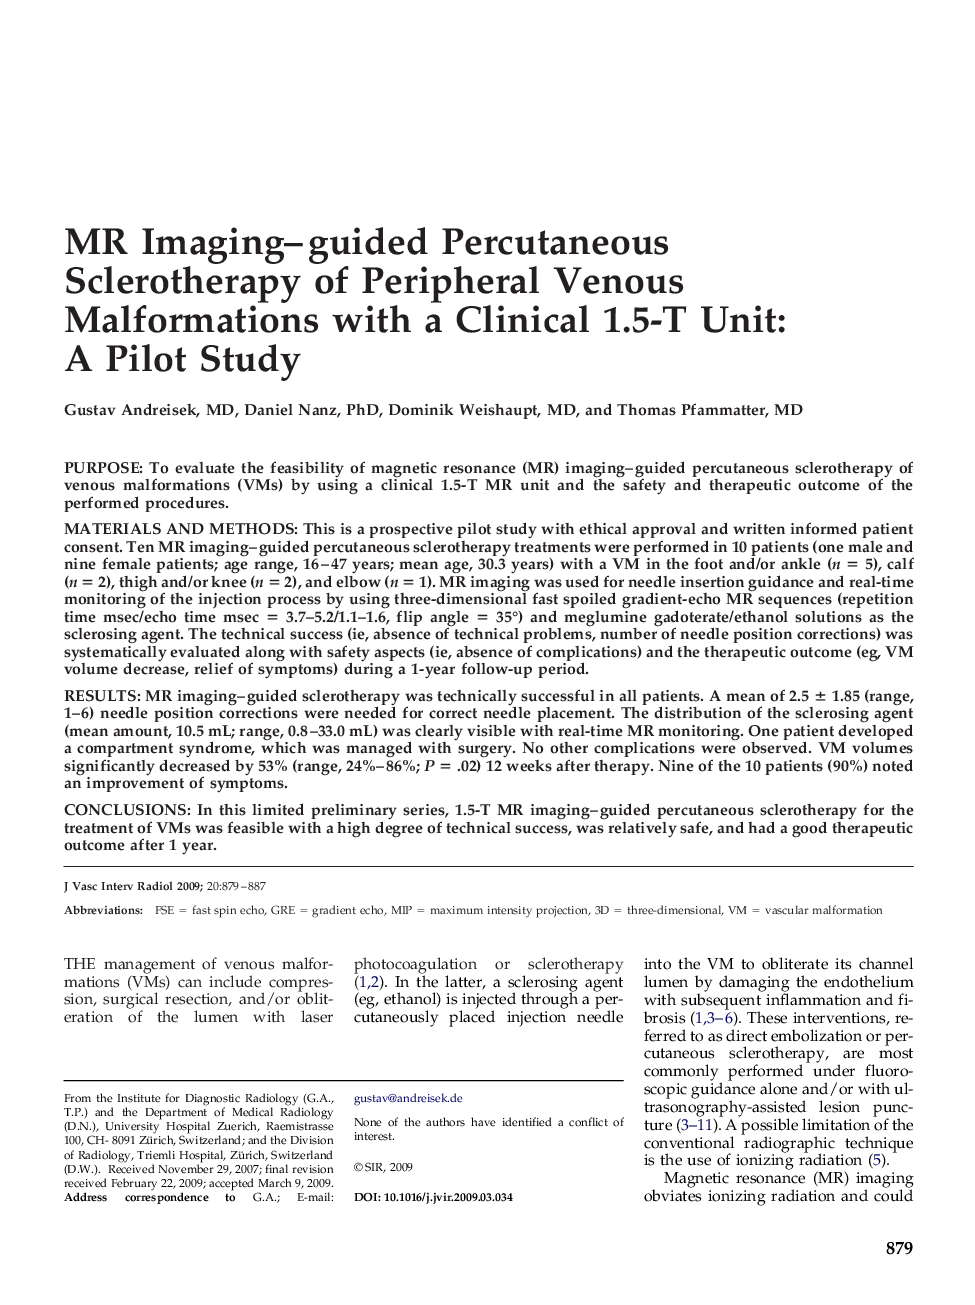 MR Imaging-guided Percutaneous Sclerotherapy of Peripheral Venous Malformations with a Clinical 1.5-T Unit: A Pilot Study